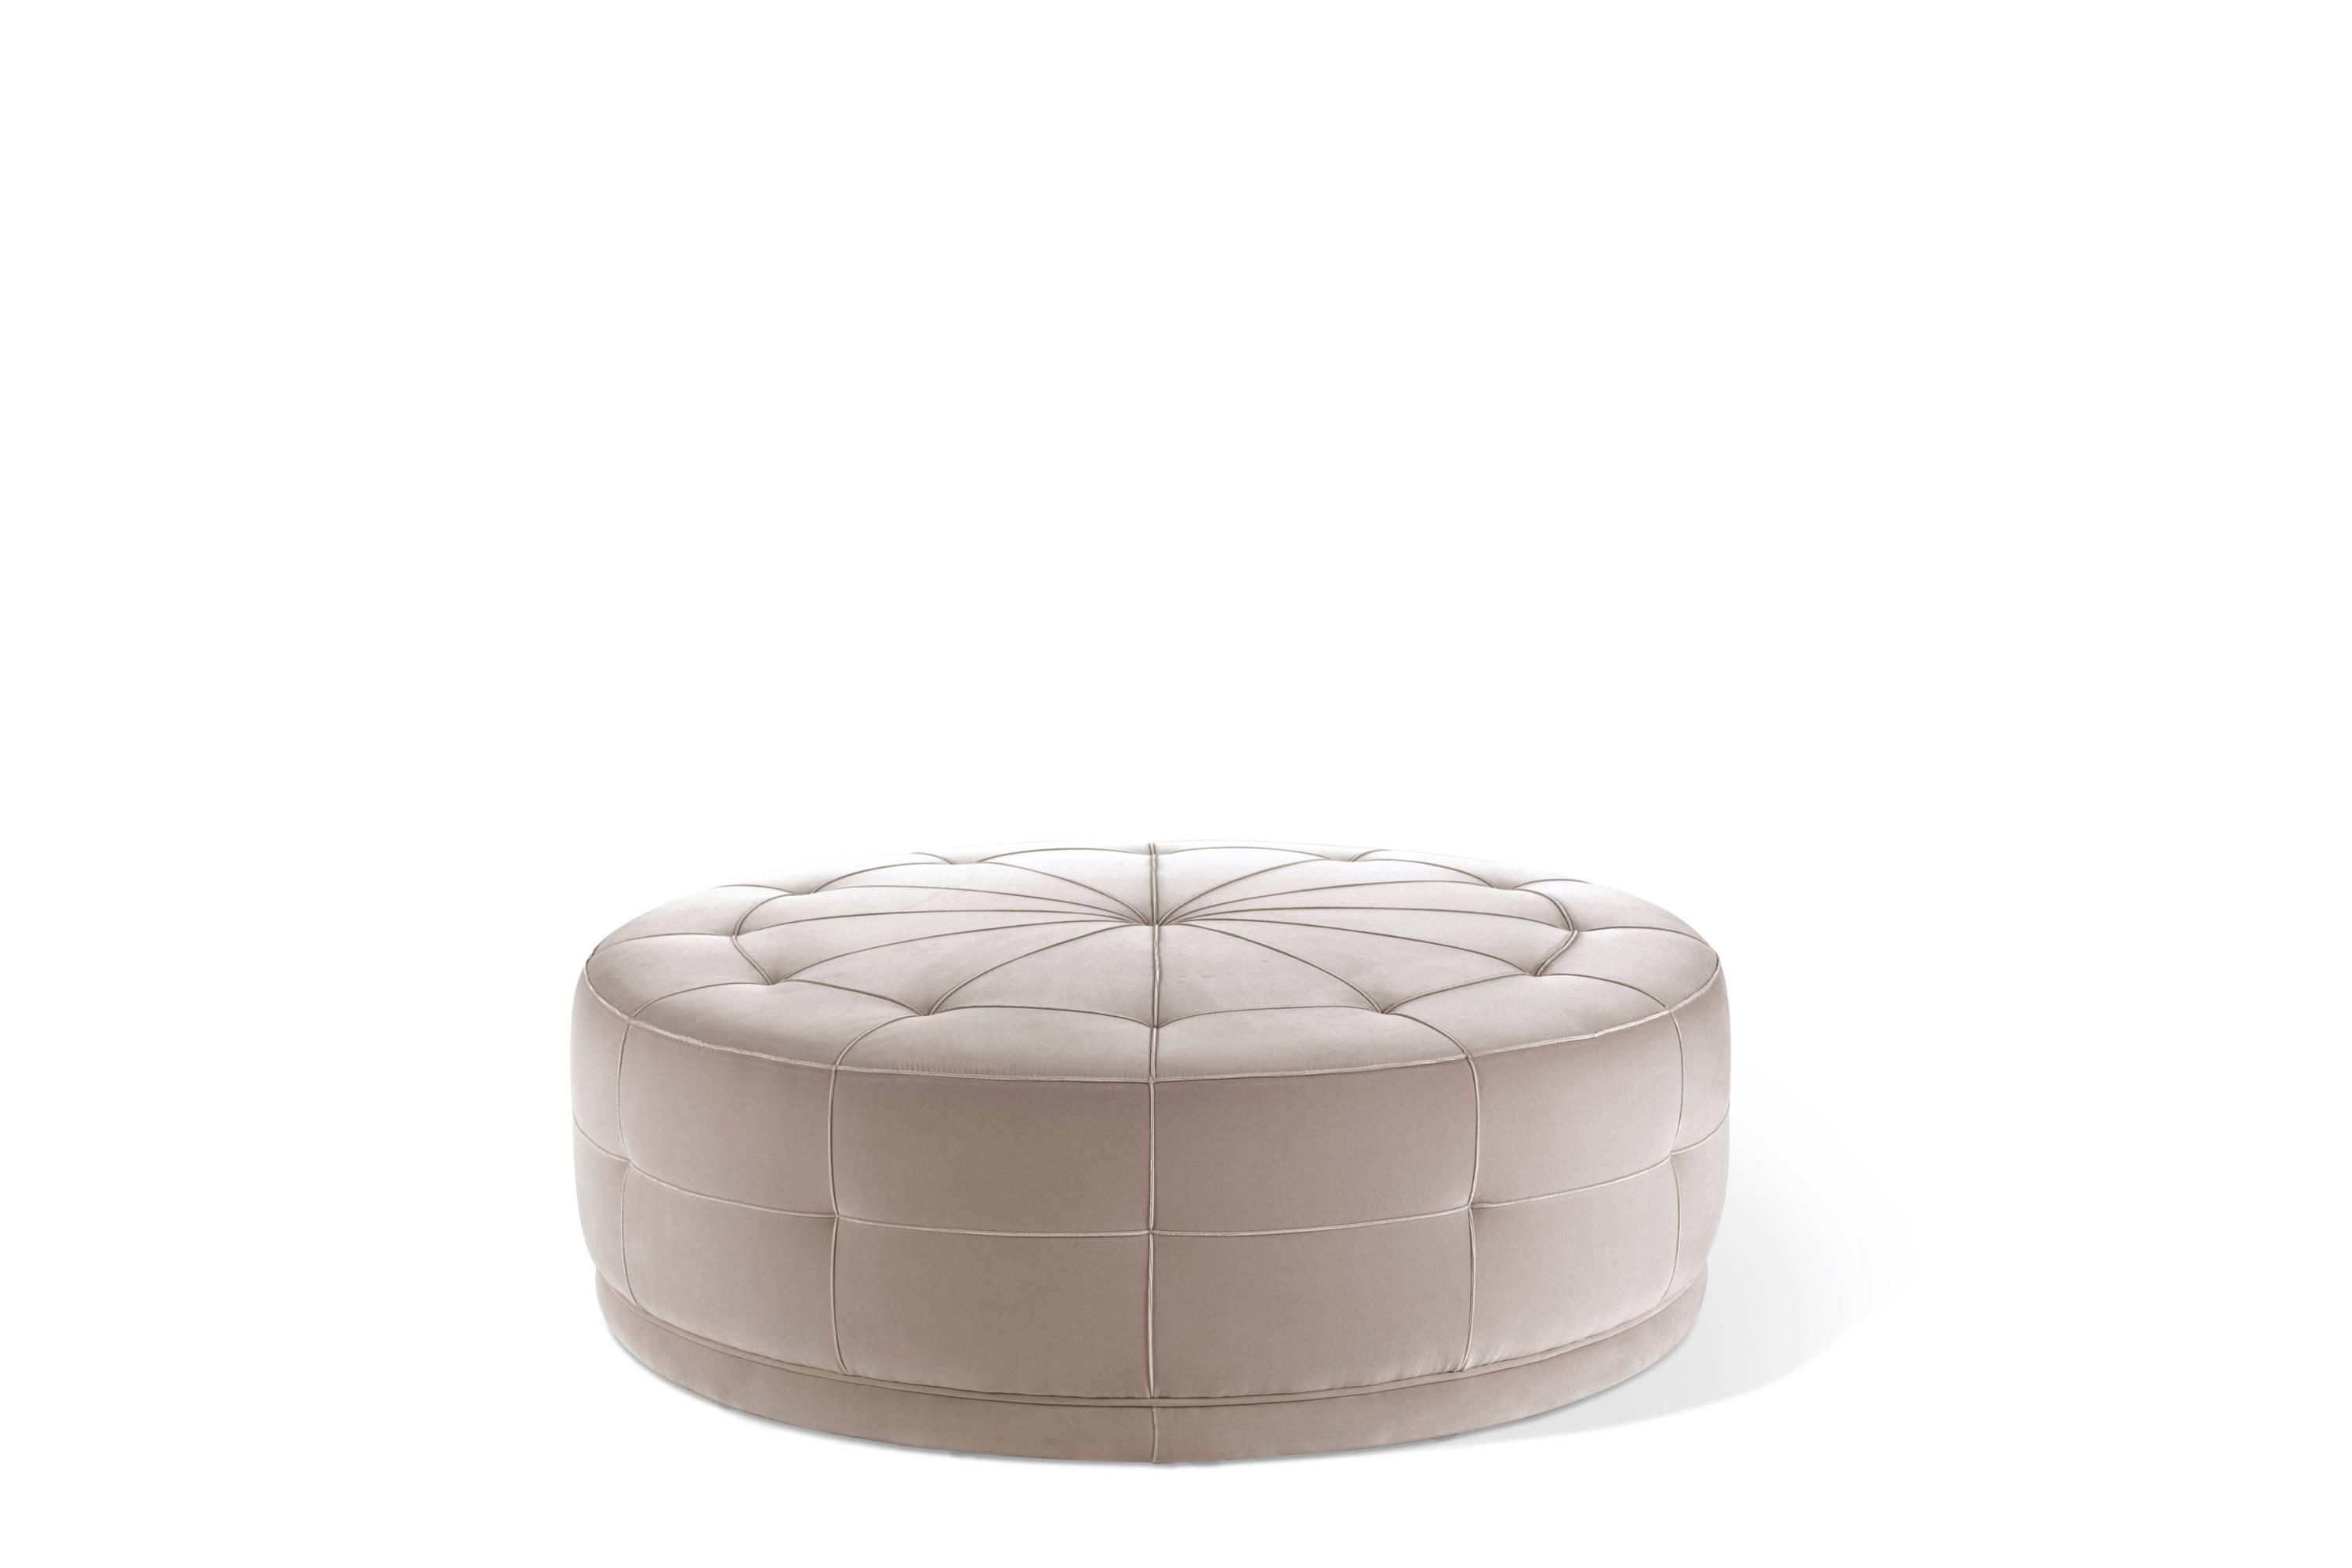 SOPHIE pouf - Bespoke projects with luxury Made in Italy classic furniture